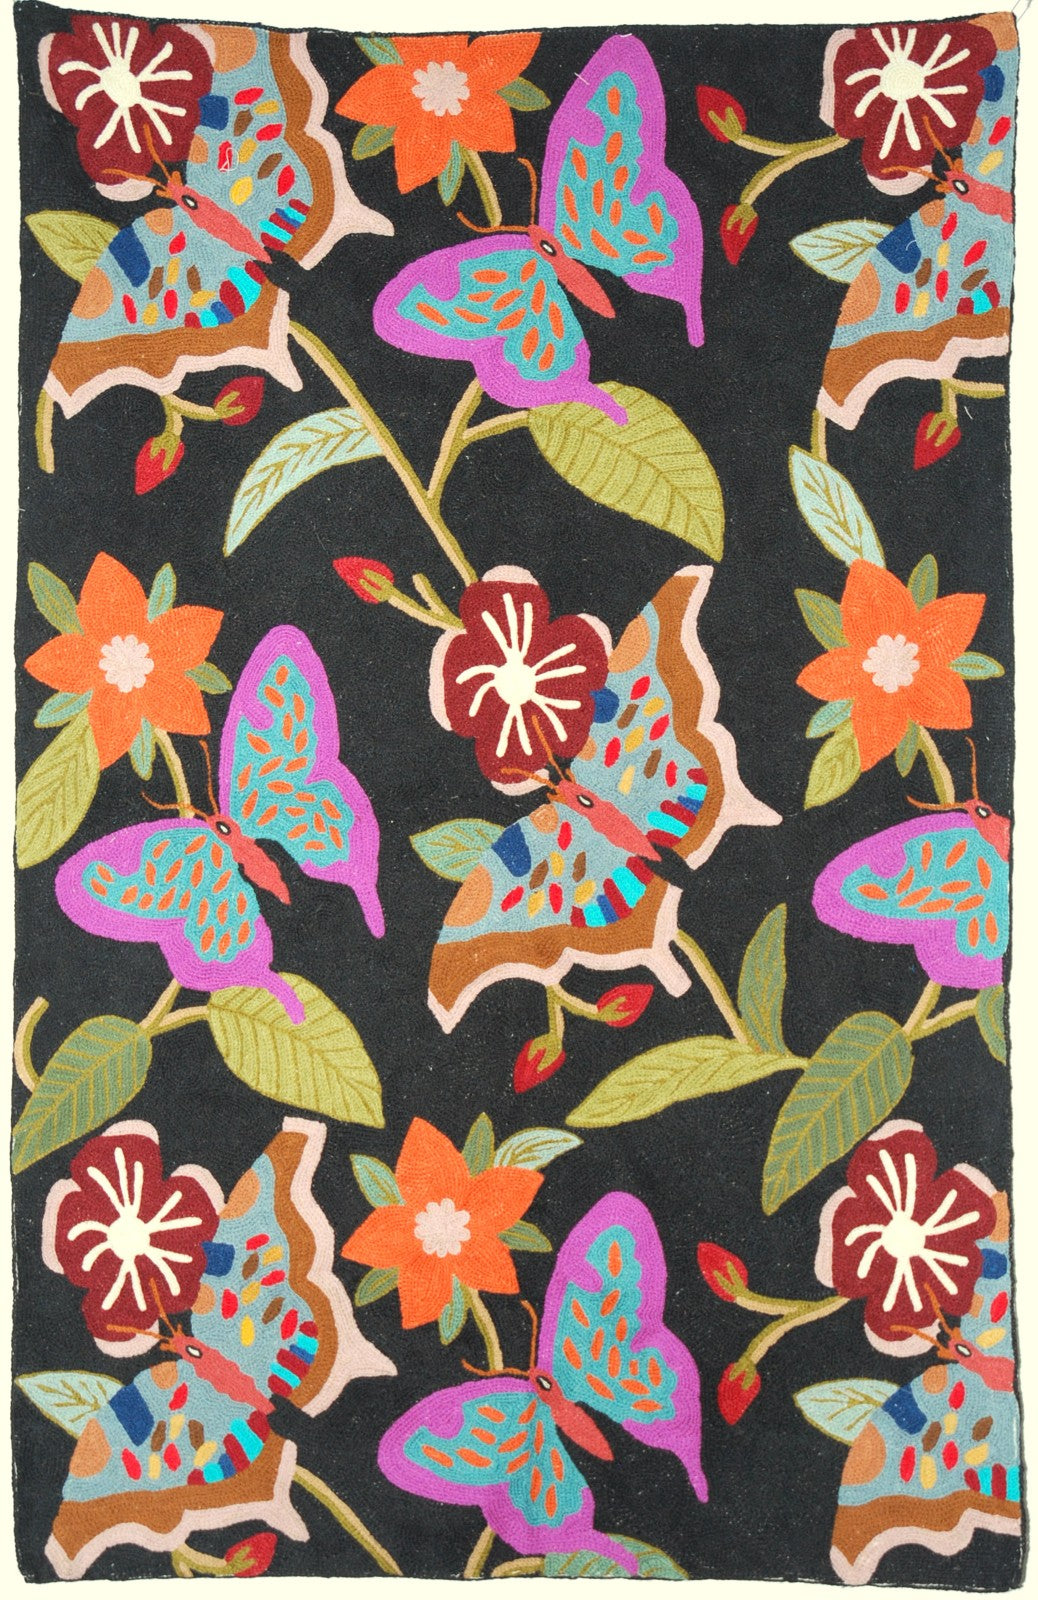 ChainStitch Tapestry Wall Hanging Area Rug "Butterflies", Multicolor Embroidery 2.5x4 feet #CWR10016